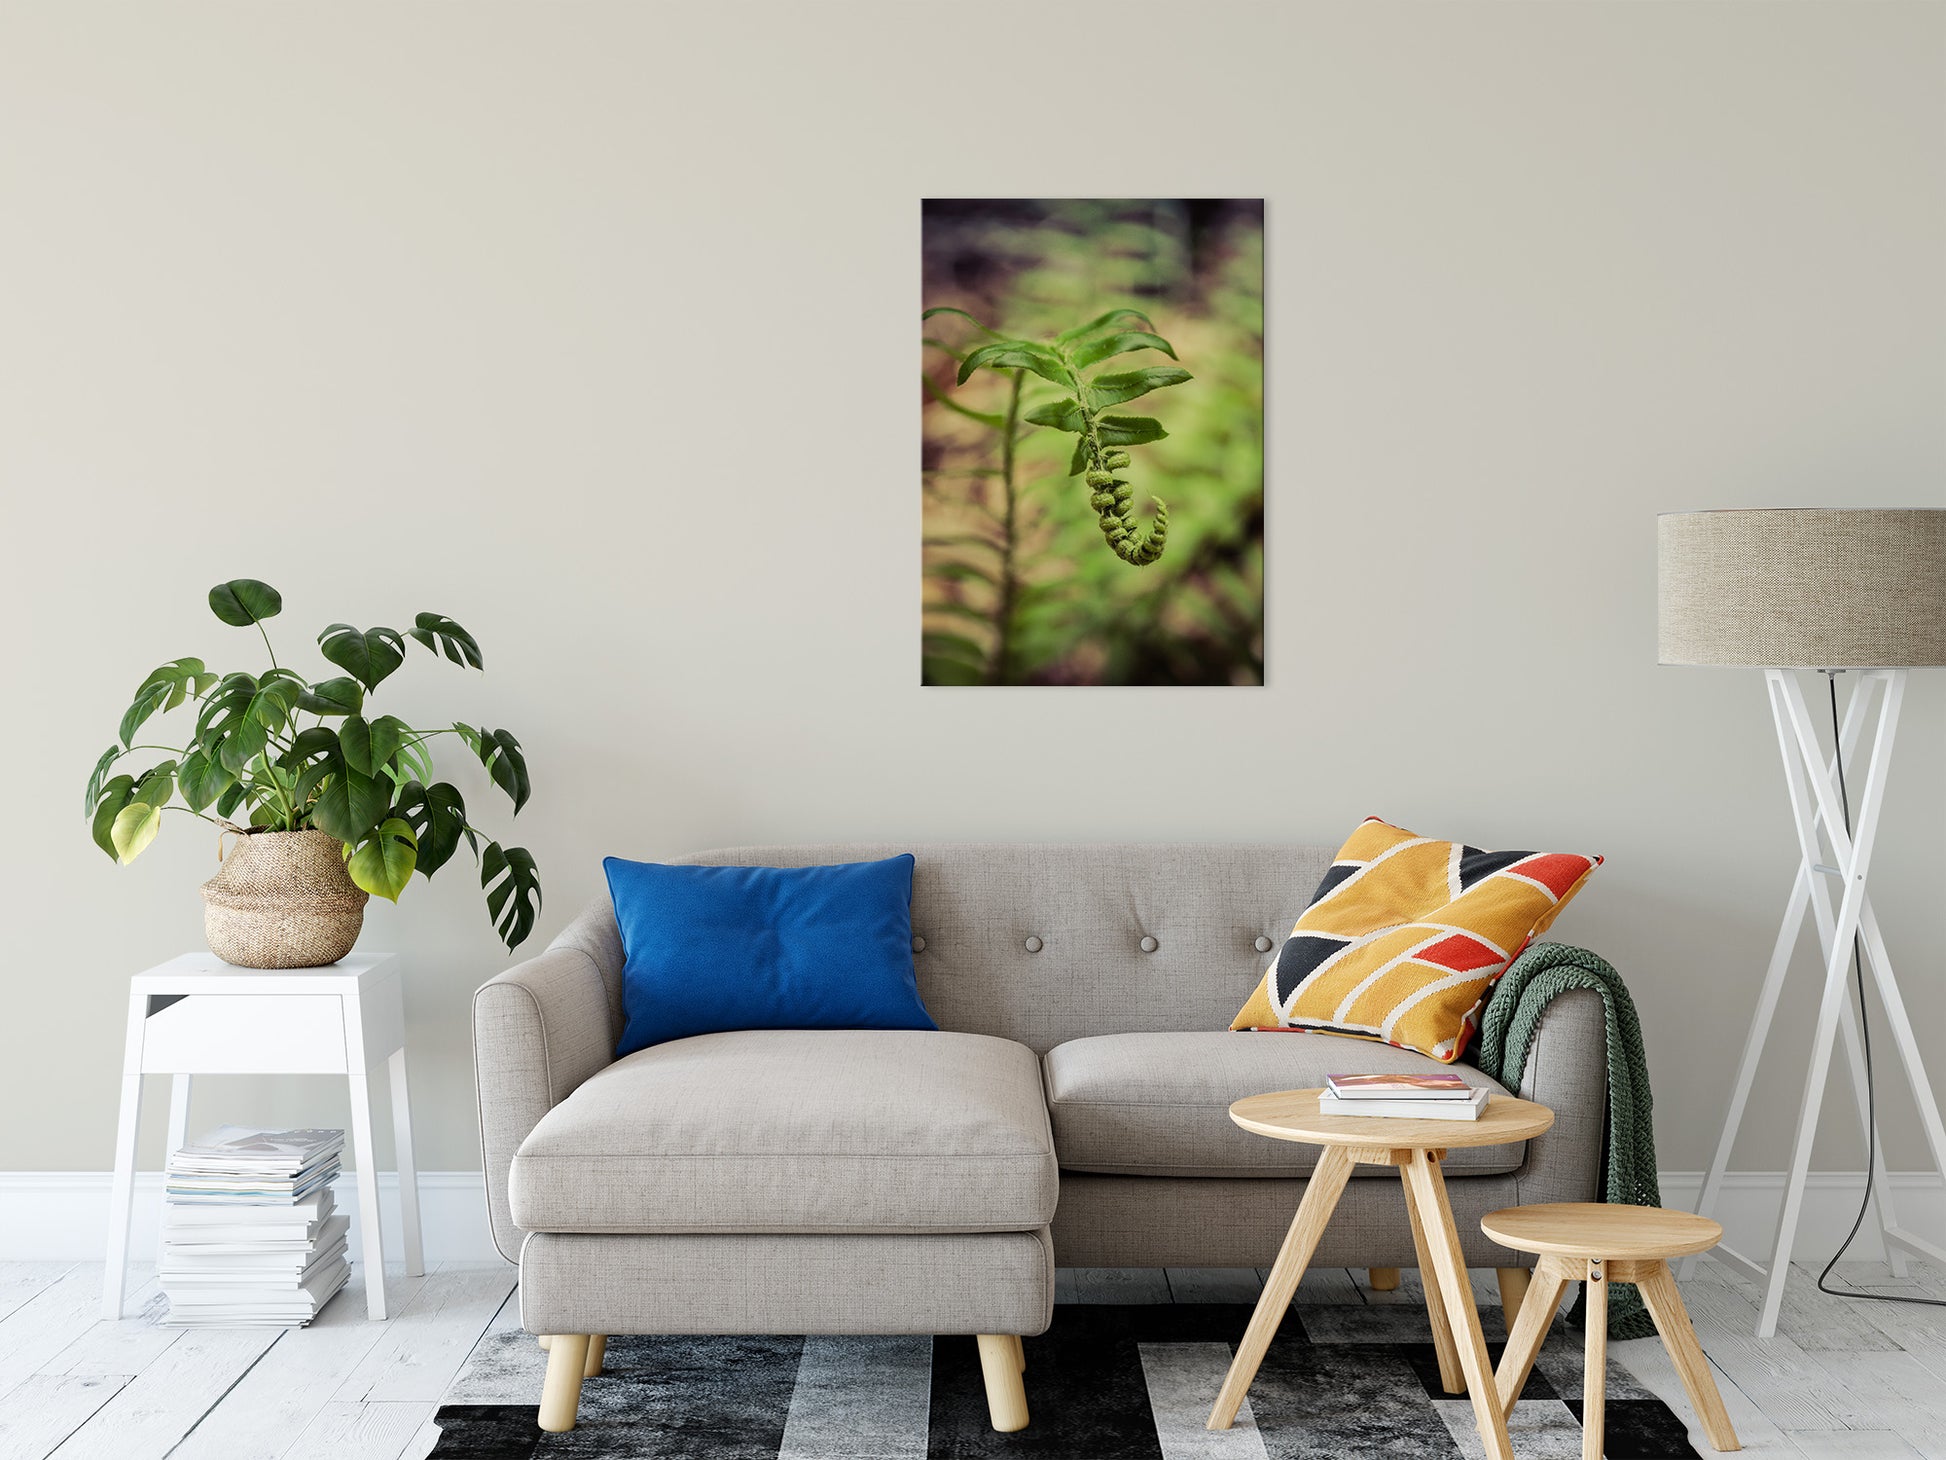 Growth of the Forest Floor Botanical / Nature Photo Fine Art Canvas Wall Art Prints 24" x 36" - PIPAFINEART